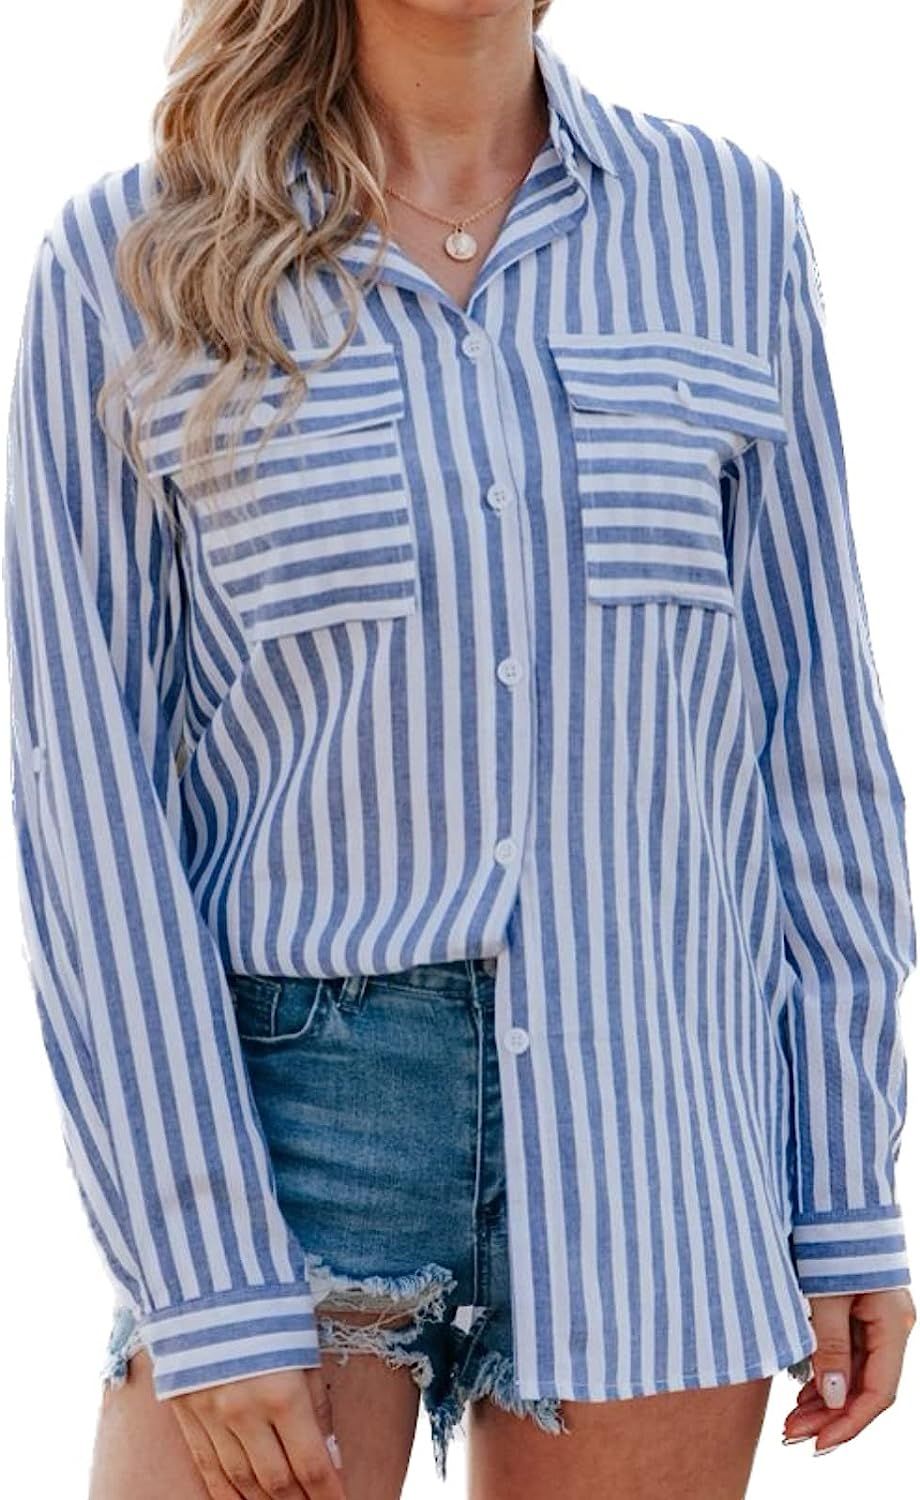 Tenna Teki Women's Striped Button Down Shirts Loose Fit Long Sleeve Tunic Top Blouses with Pocket... | Amazon (US)